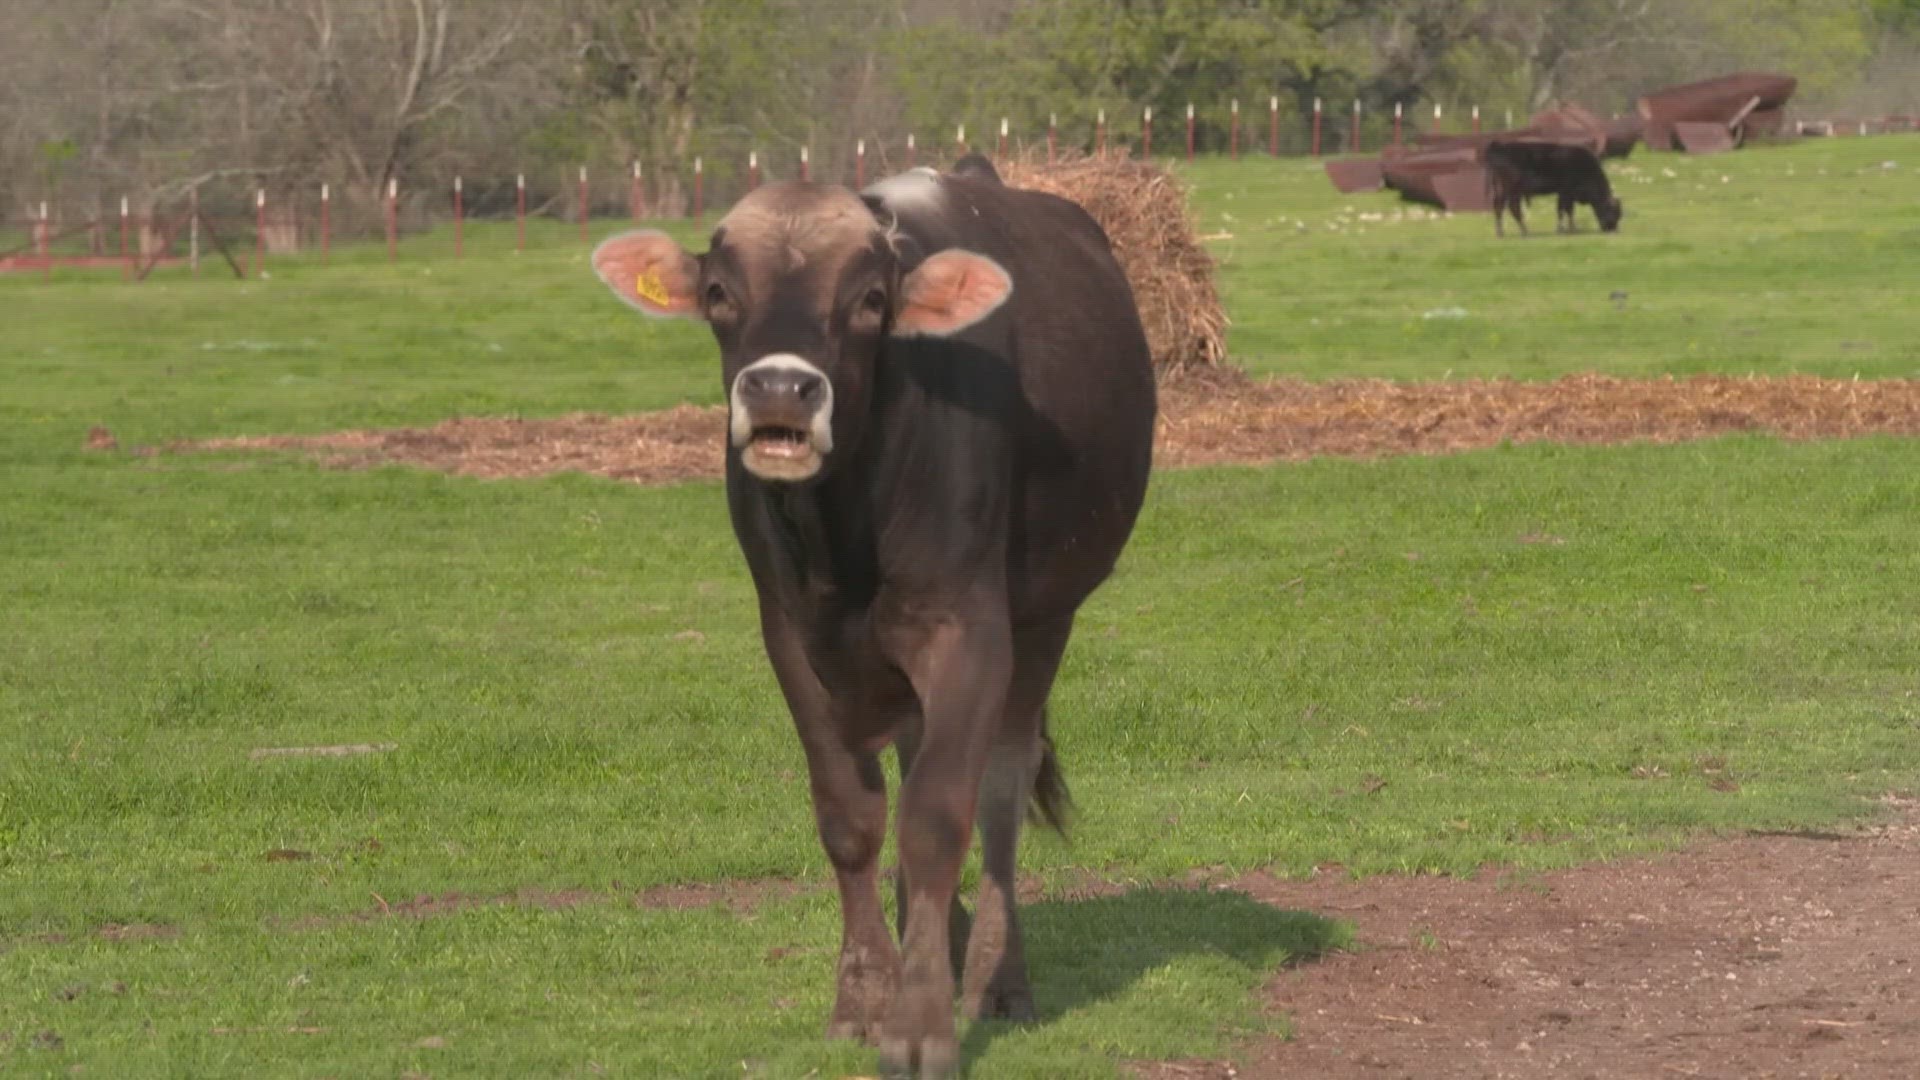 While no cases have been reported in Ohio, there are cases in Michigan. Farmers are being asked to watch their dairy cows for symptoms, including a lack of appetite.